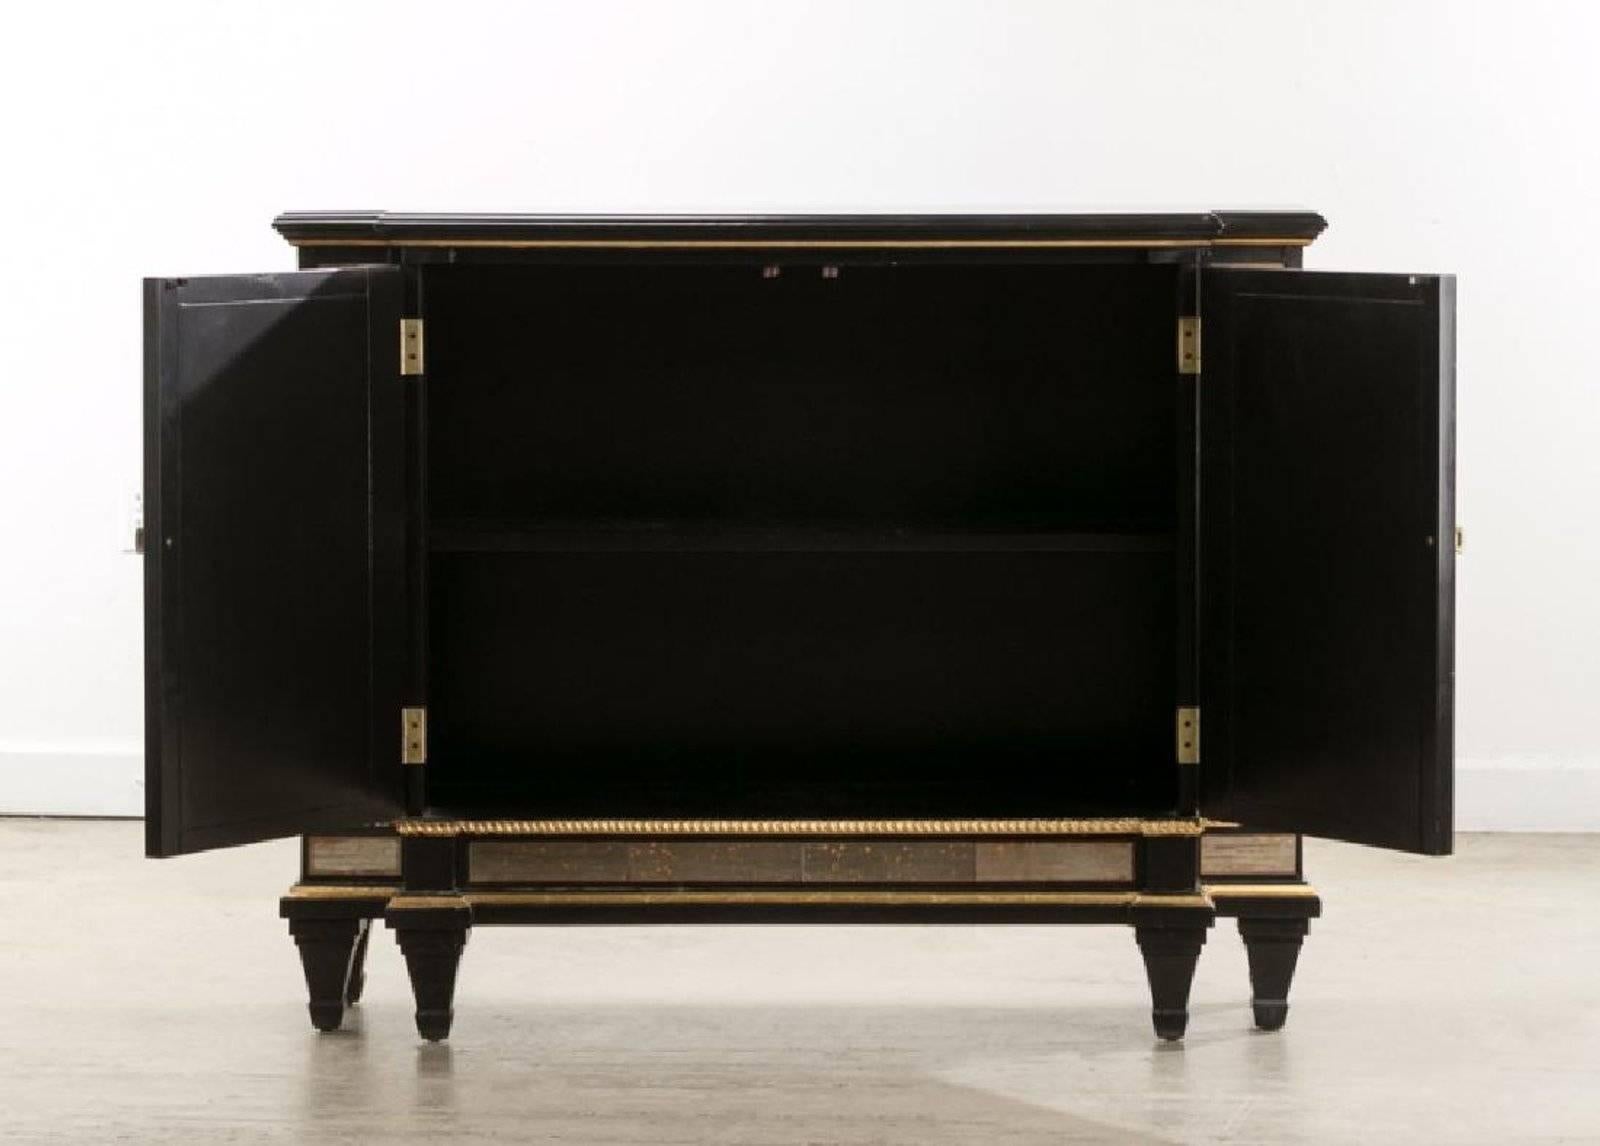 A elegant two-door console cabinet with mirrored panels set in an ebonized wood body by Maison Jansen. Measures: Height 37.75